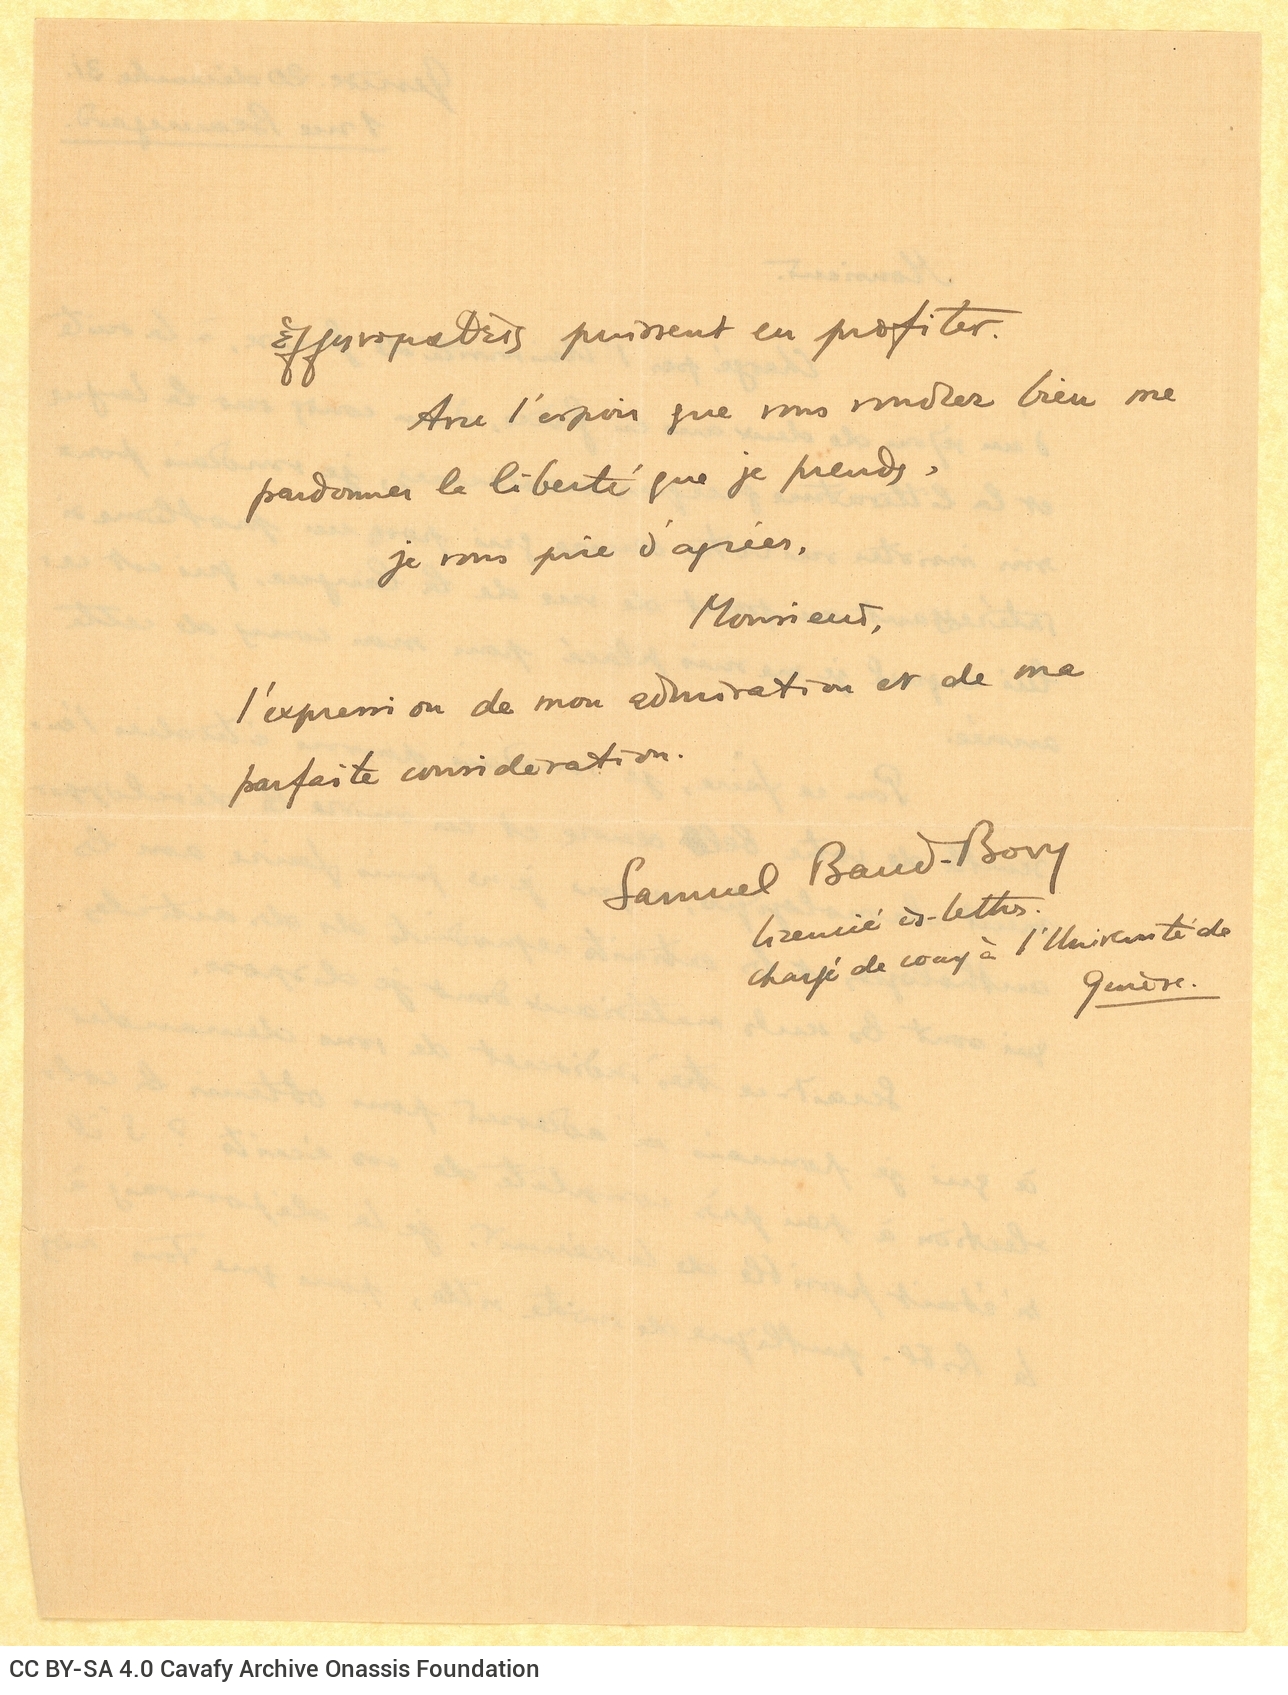 Handwritten letter by Samuel Baud-Bovy to Cavafy on both sides of a sheet. He asks the poet to despatch the ensemble of his p